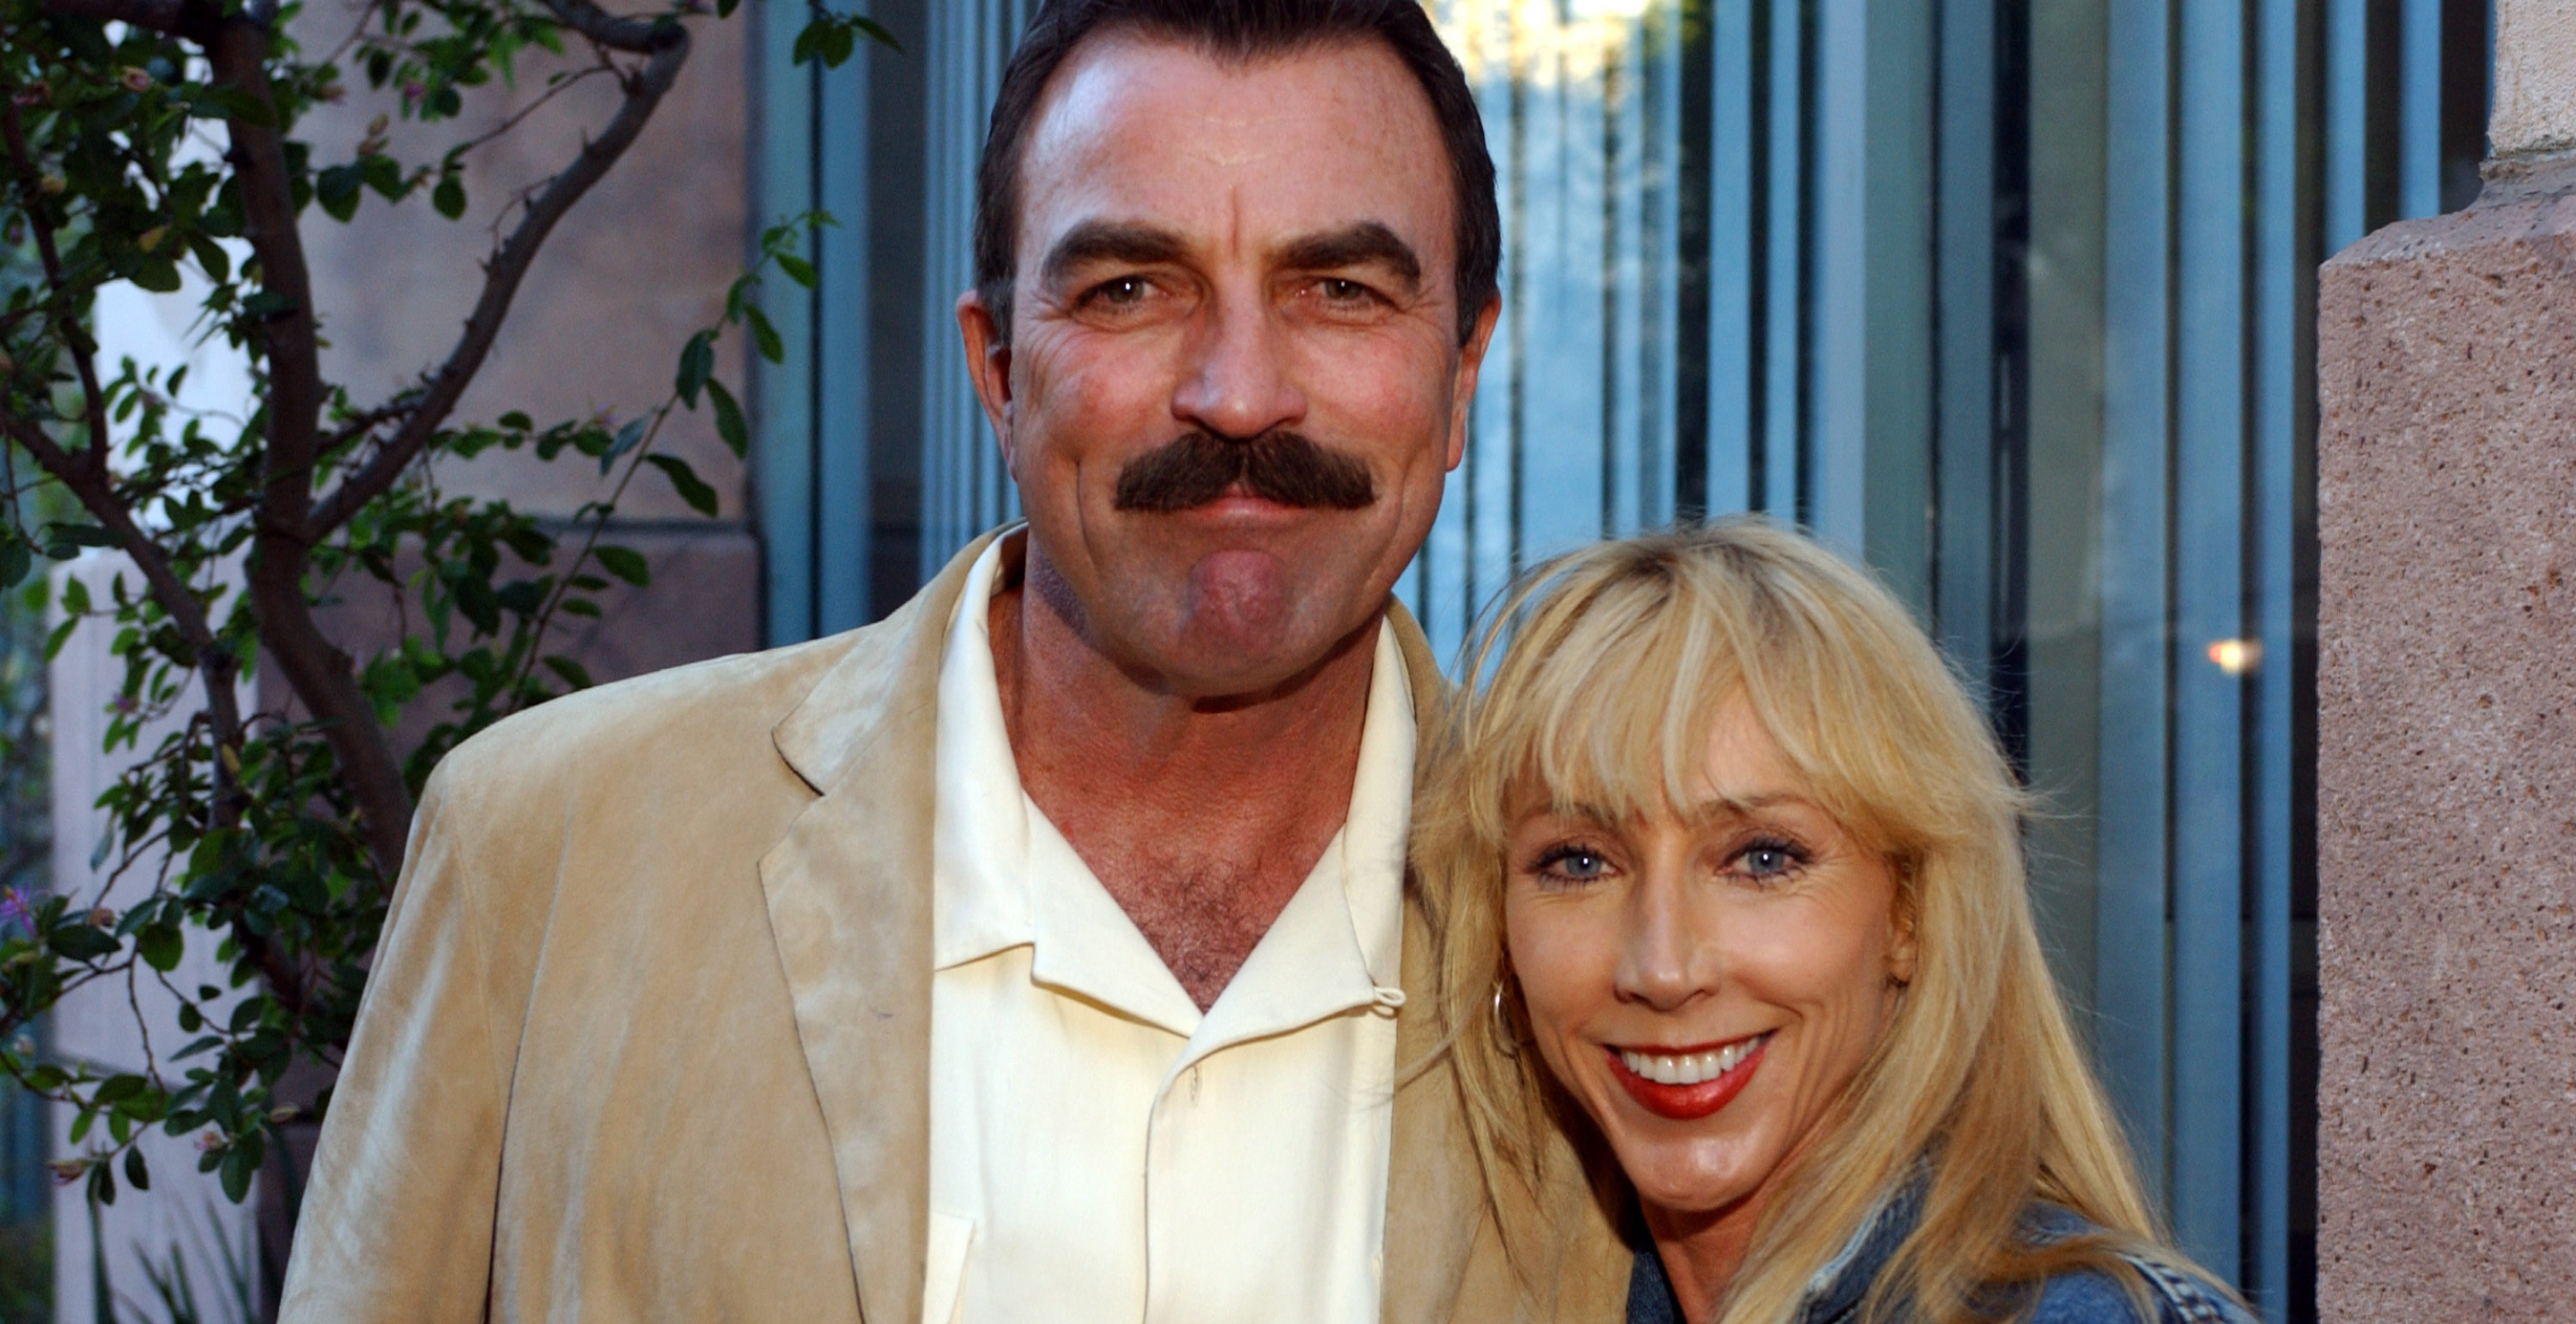 Tom Selleck and wife, Jillie Mack during 8th Anniversary of the Grand Havana Room and the Premiere of James Orr's Documentaries on the Fuente Family - Arrivals at The Grand Havana Room in Beverly Hills, California, United States